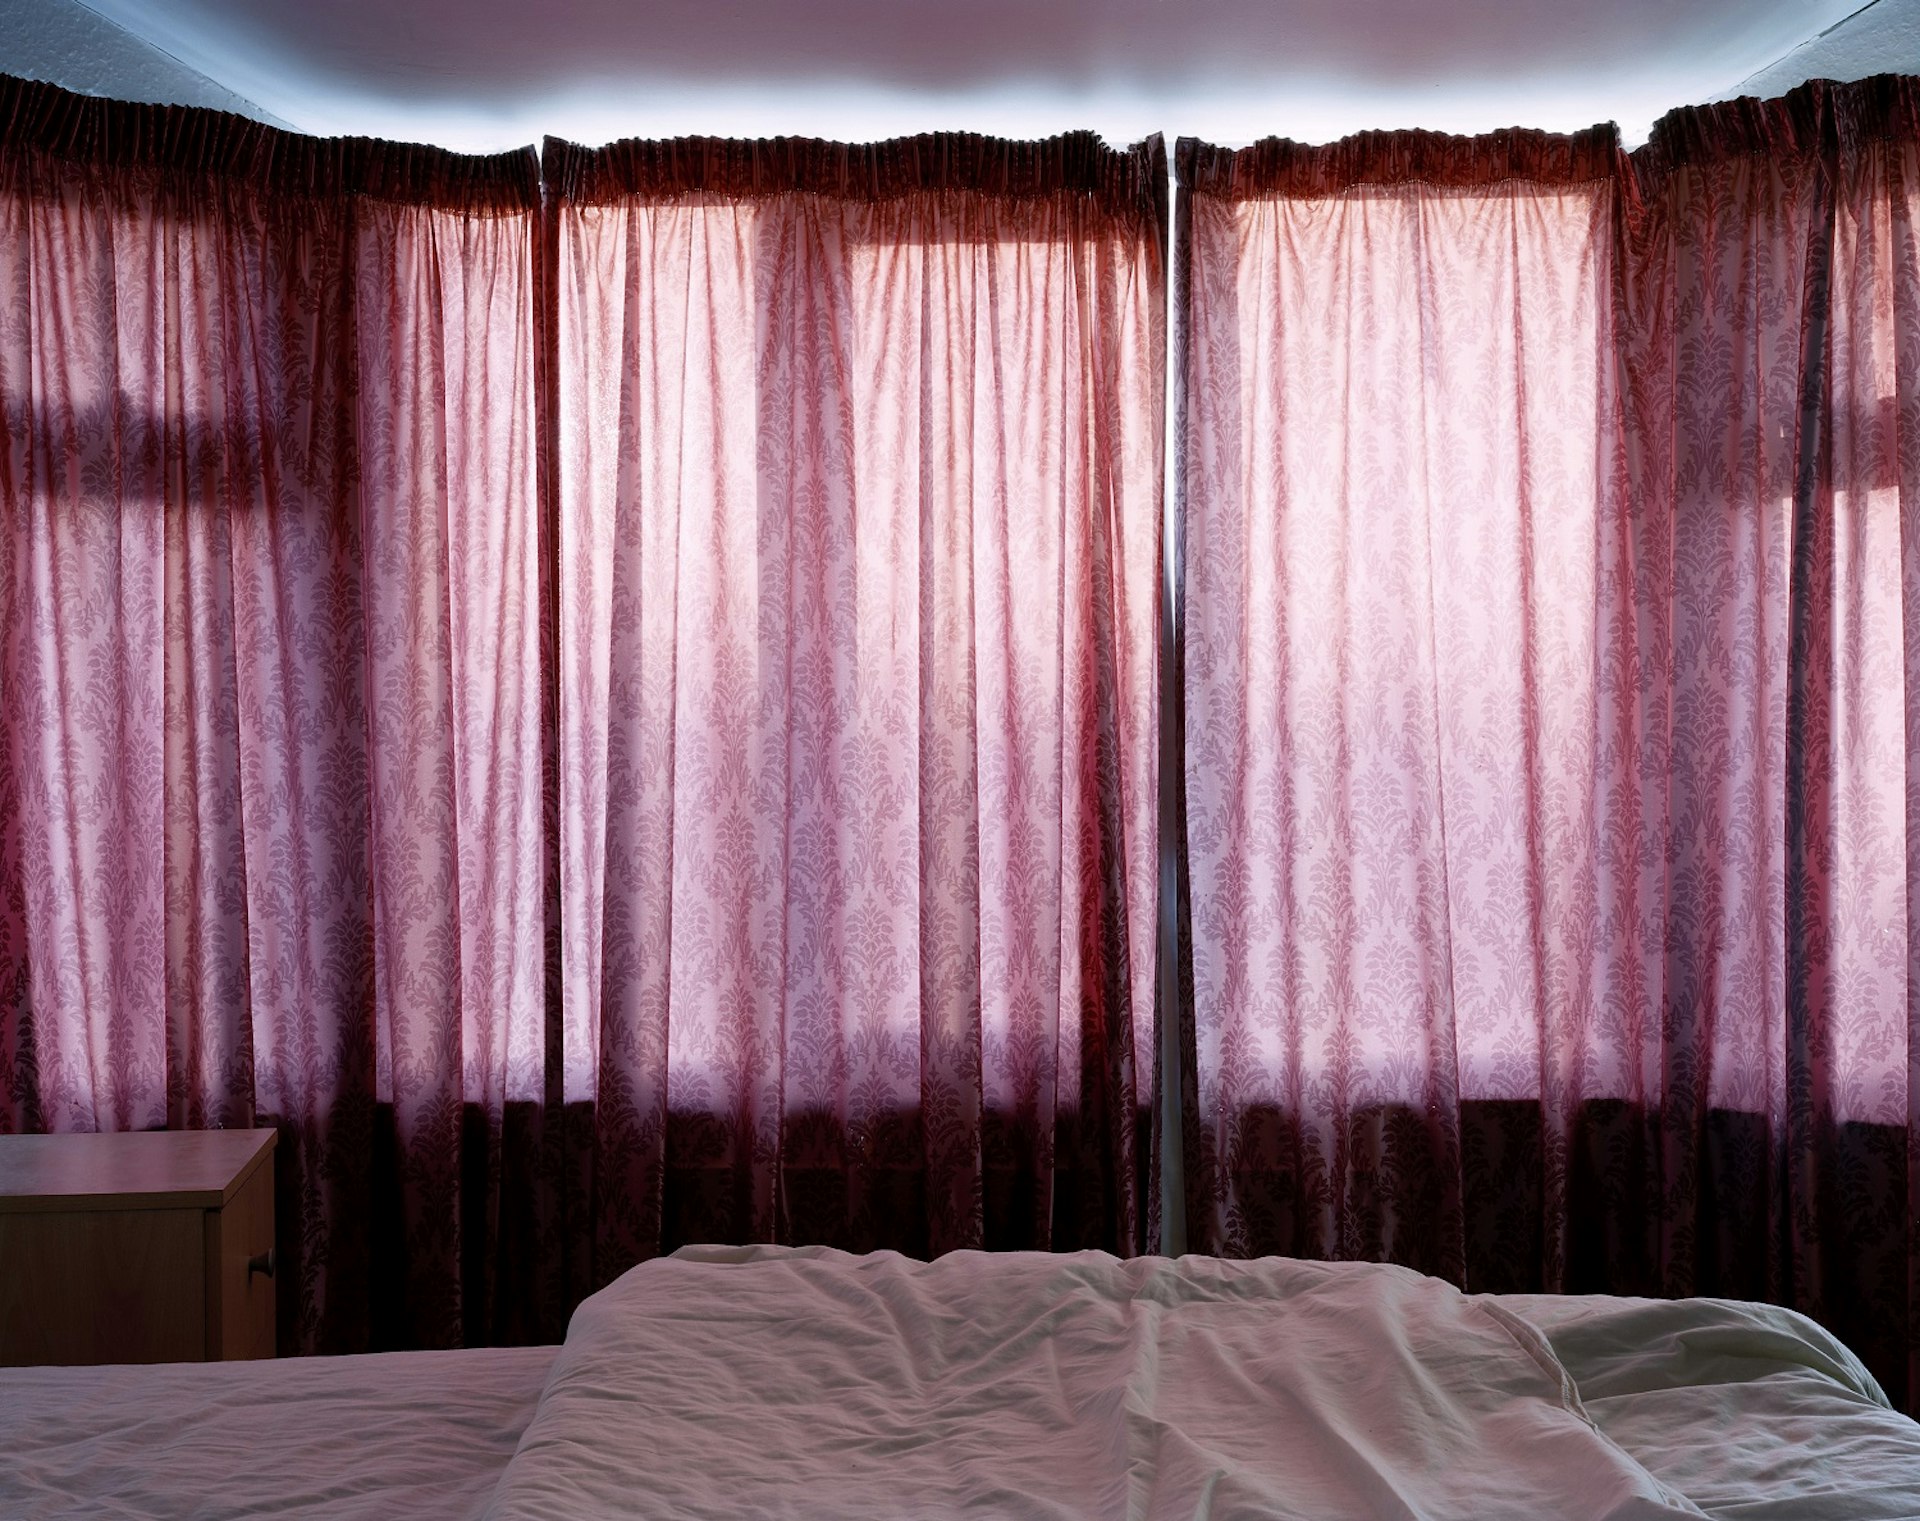 Bedroom; from the series Control Order House © Edmund Clark, Courtesy of Flowers Gallery London and New York